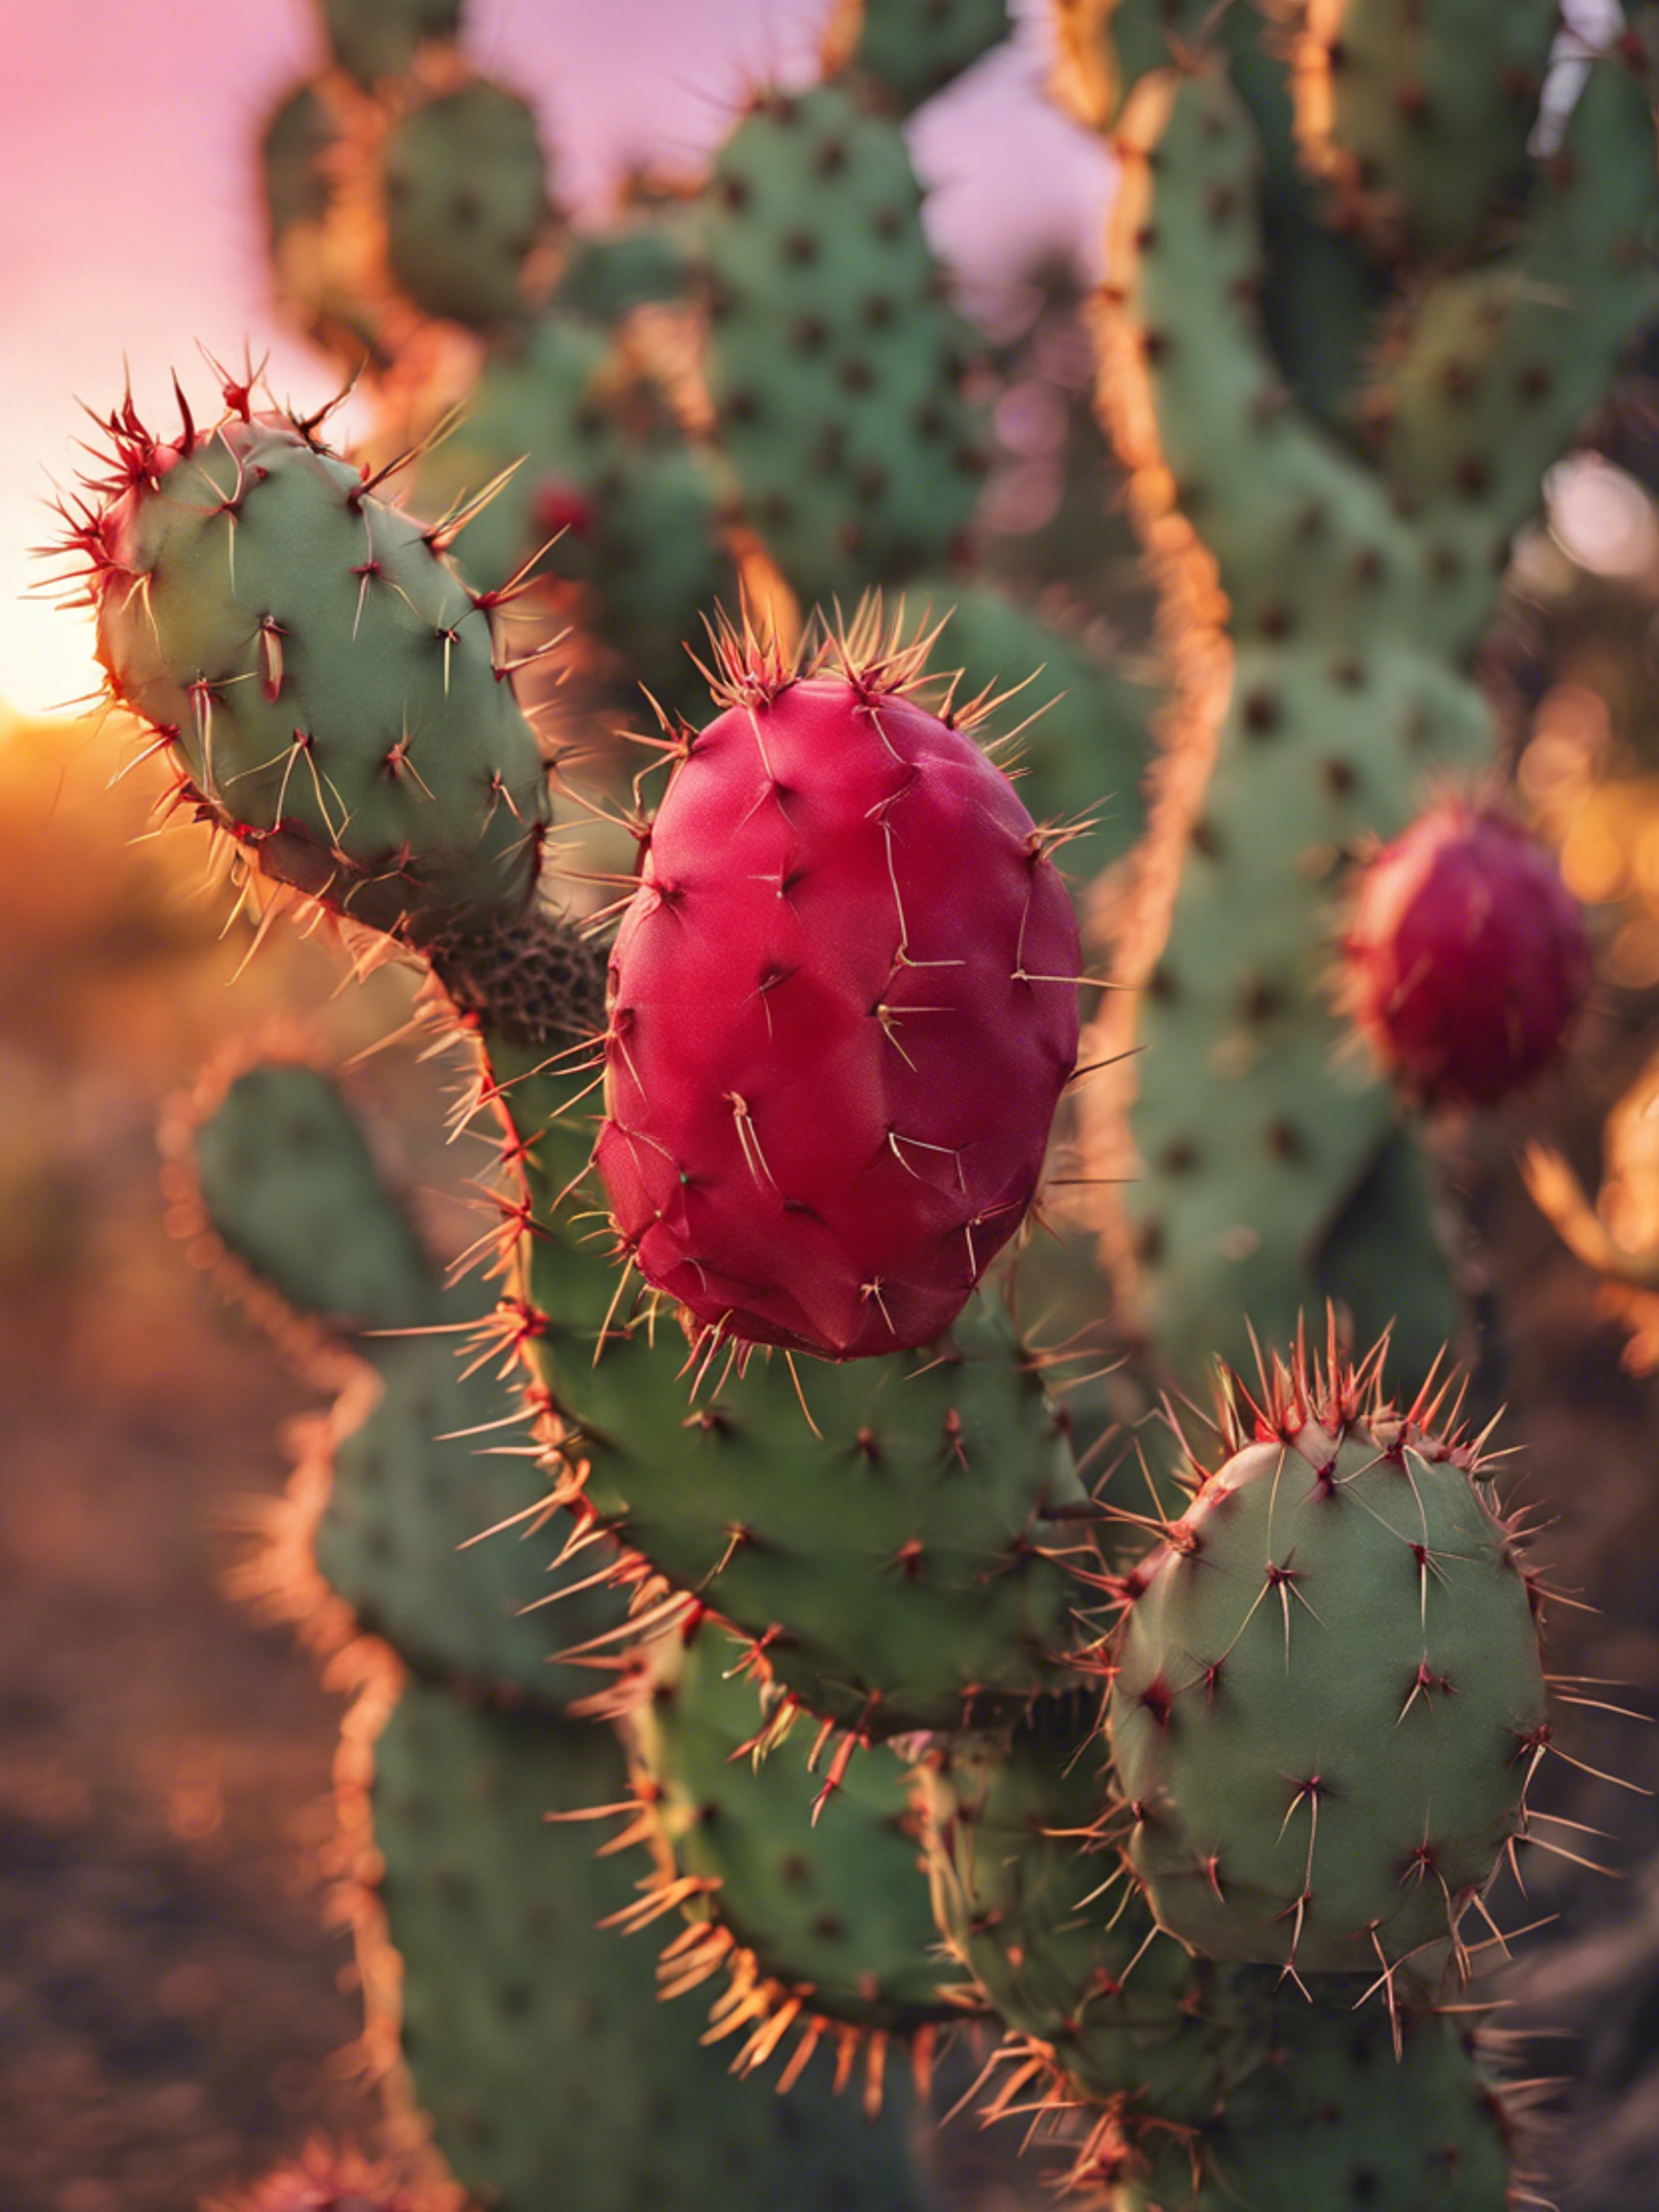 A prickly pear cactus with ripe, red fruits against a sunset background. วอลล์เปเปอร์[5965817ee192450fa25b]